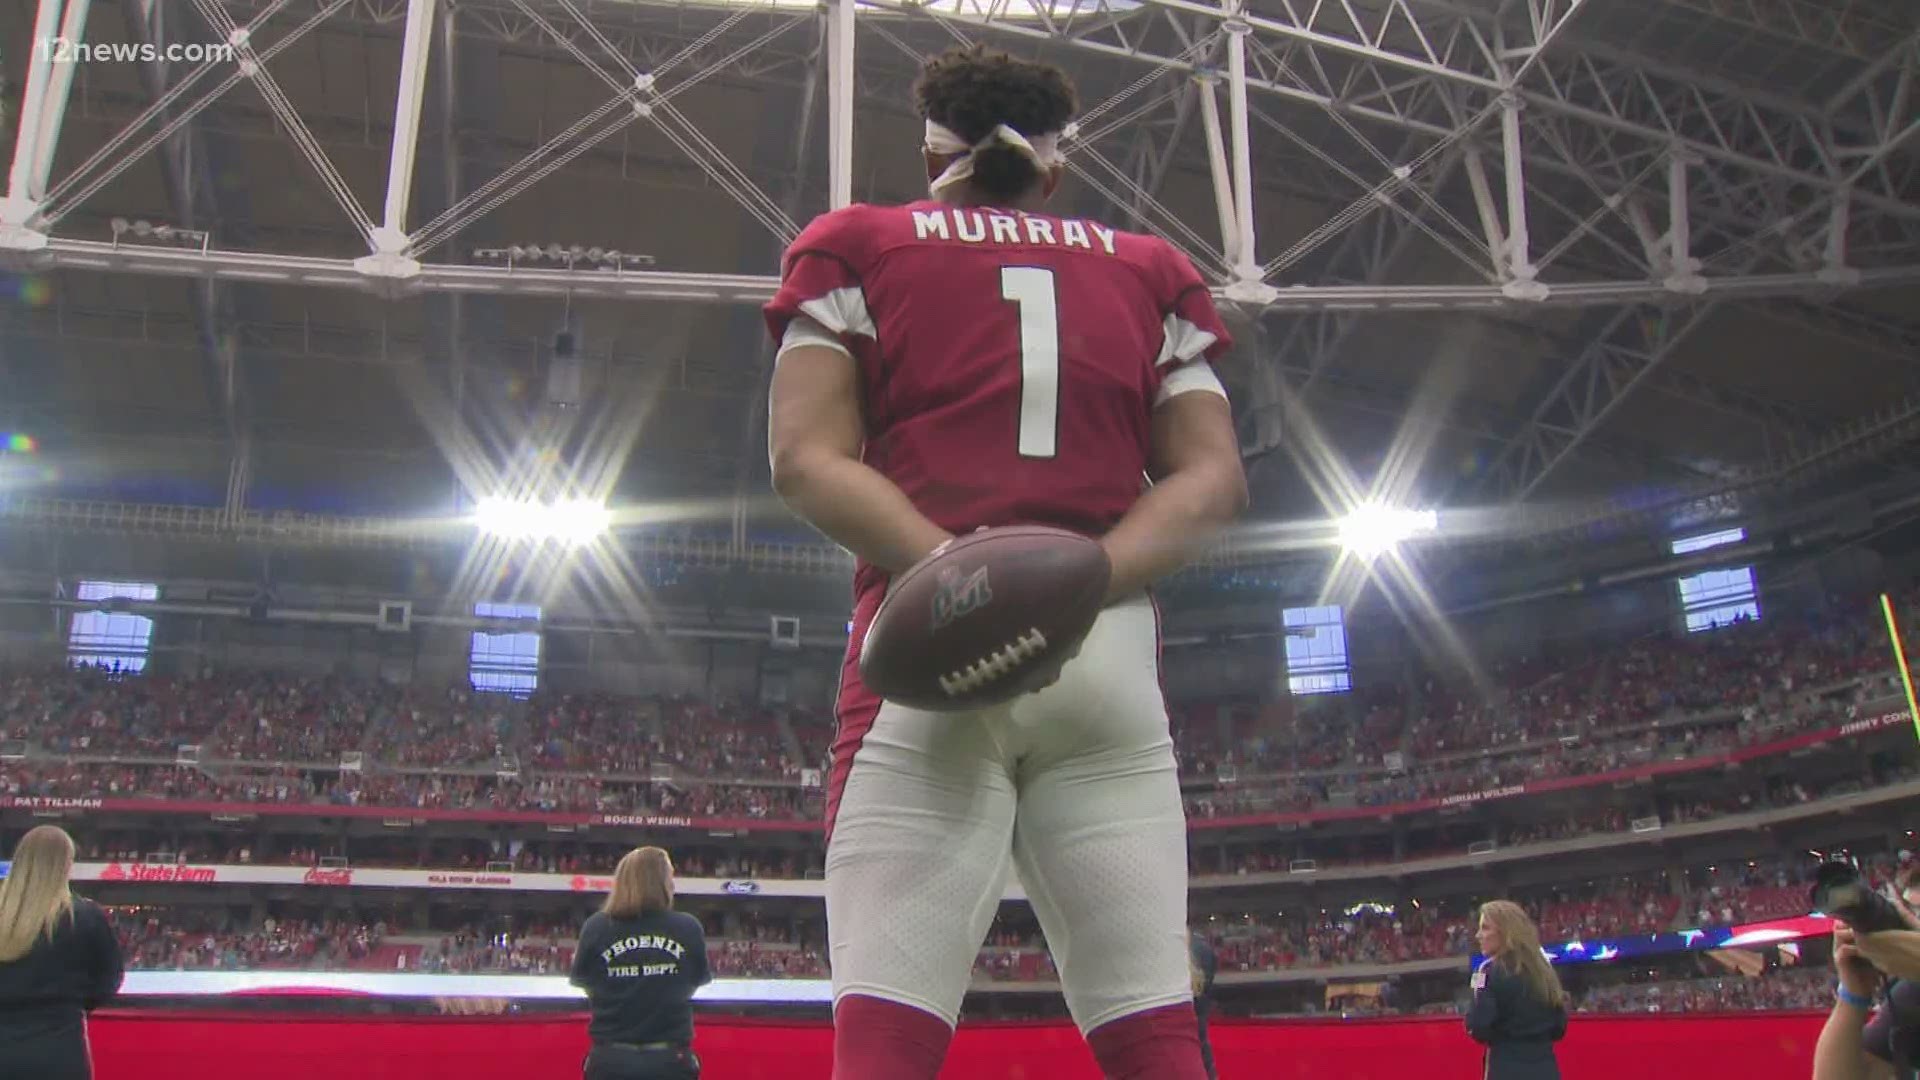 On a video conference call with Arizona media, Cardinals QB Kyler Murray spoke out against racial injustice. He said he would be "taking a knee" during games.